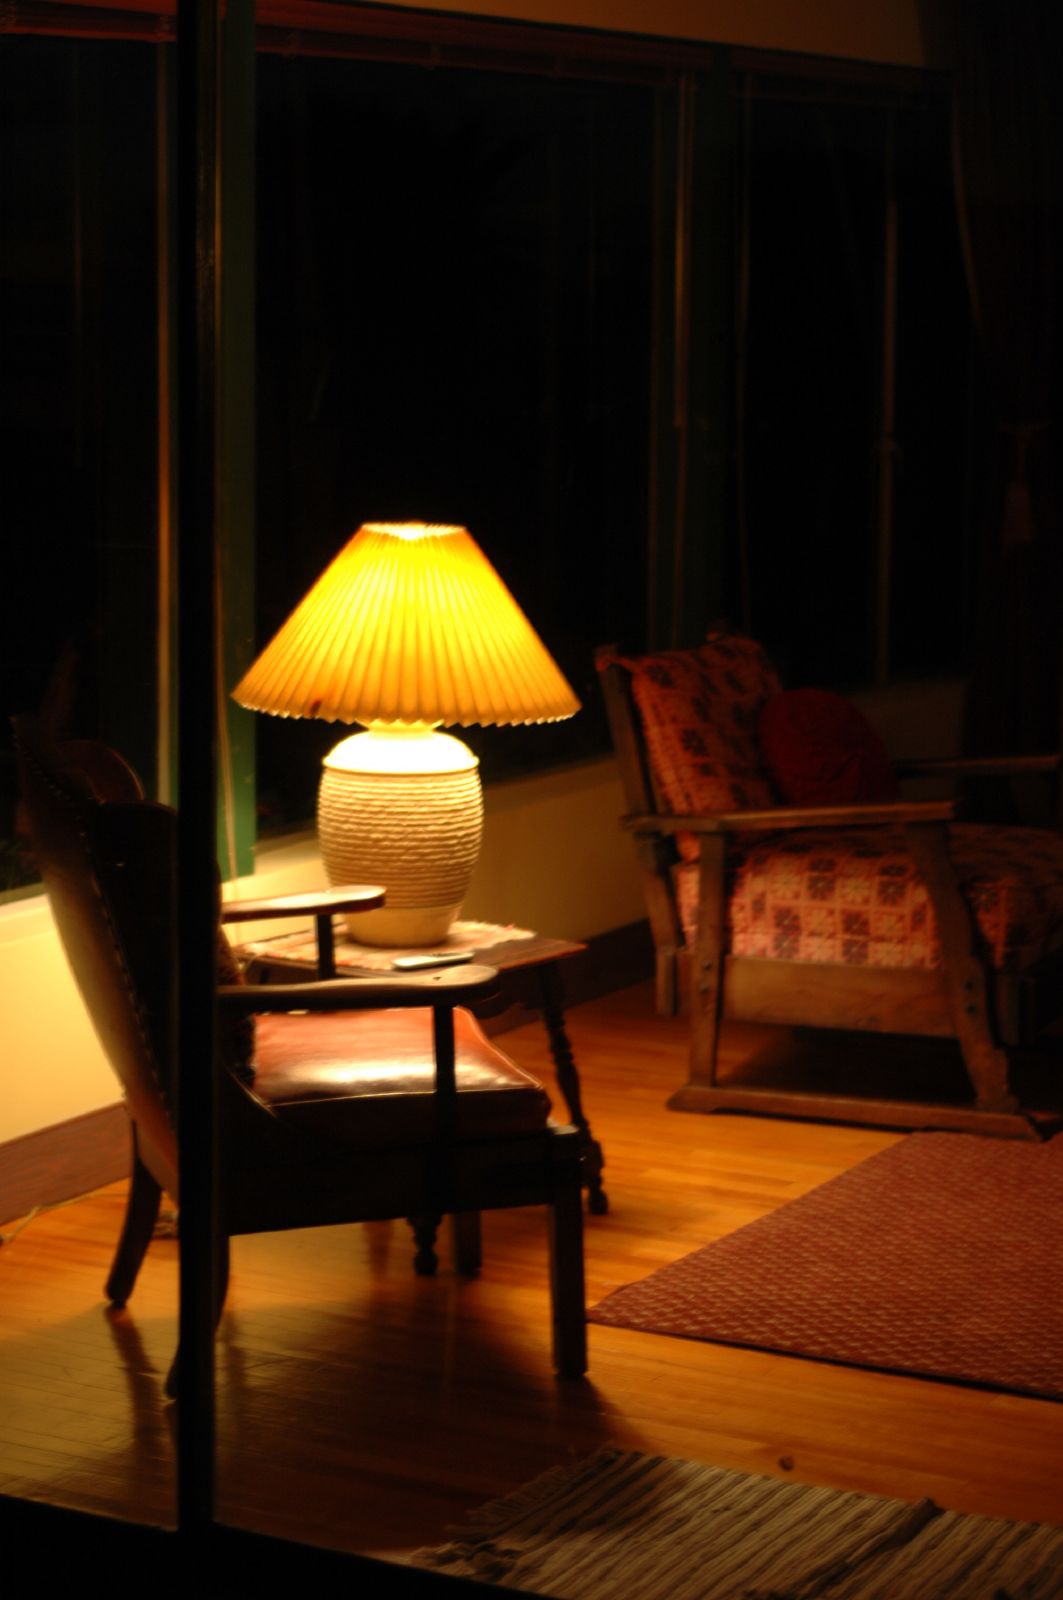 an empty chair sits on a wooden floor next to a lamp in a darkened room